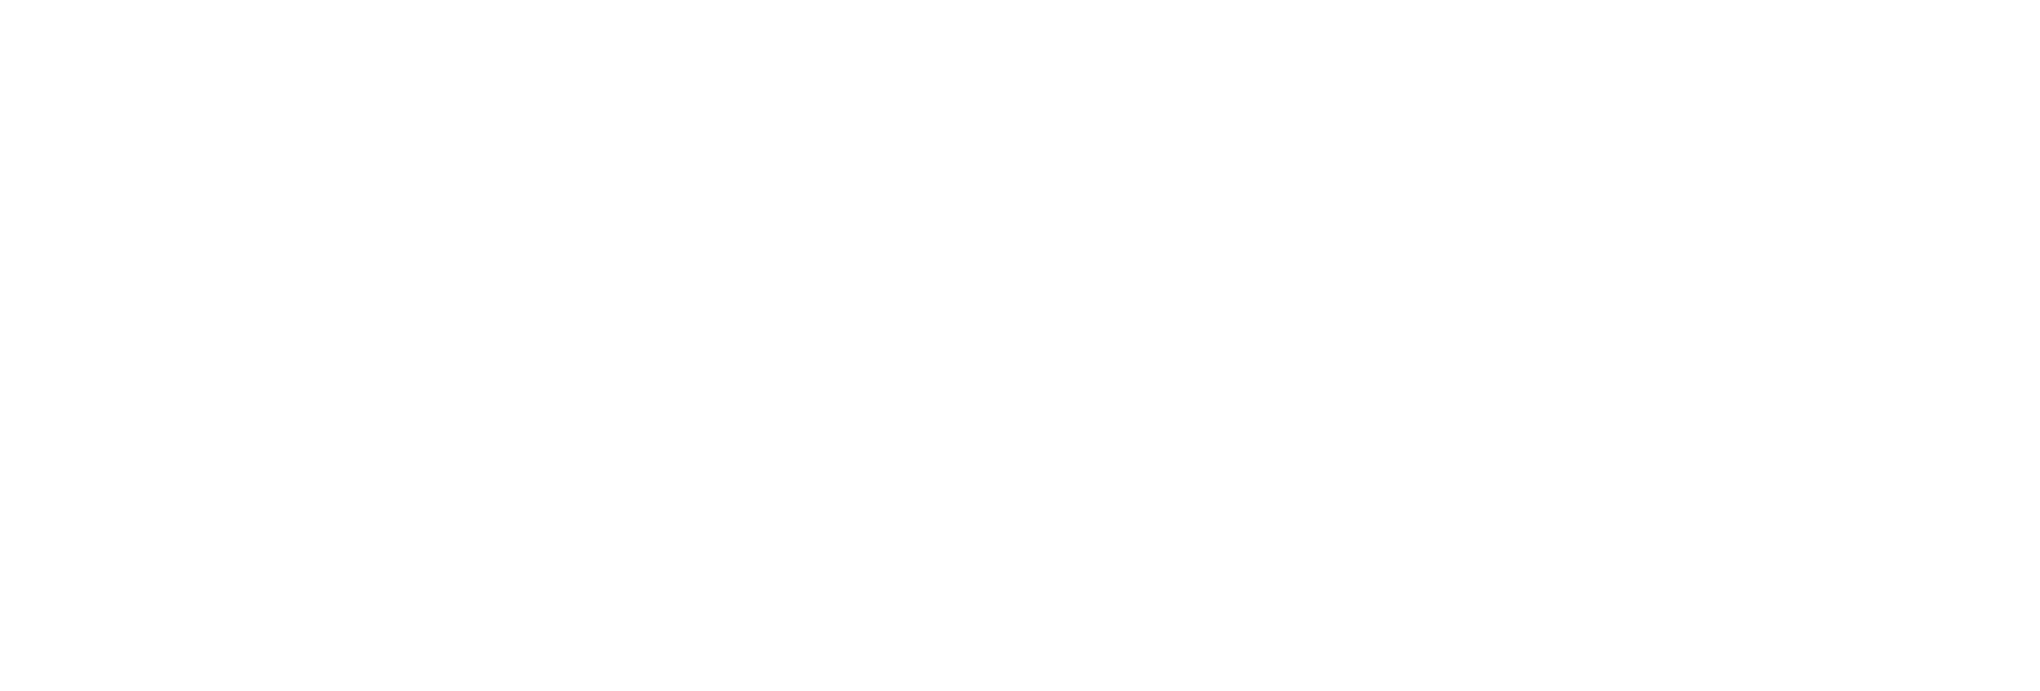 Association to Advance Collegiate Schools of Business (AACSB) Accredited logo